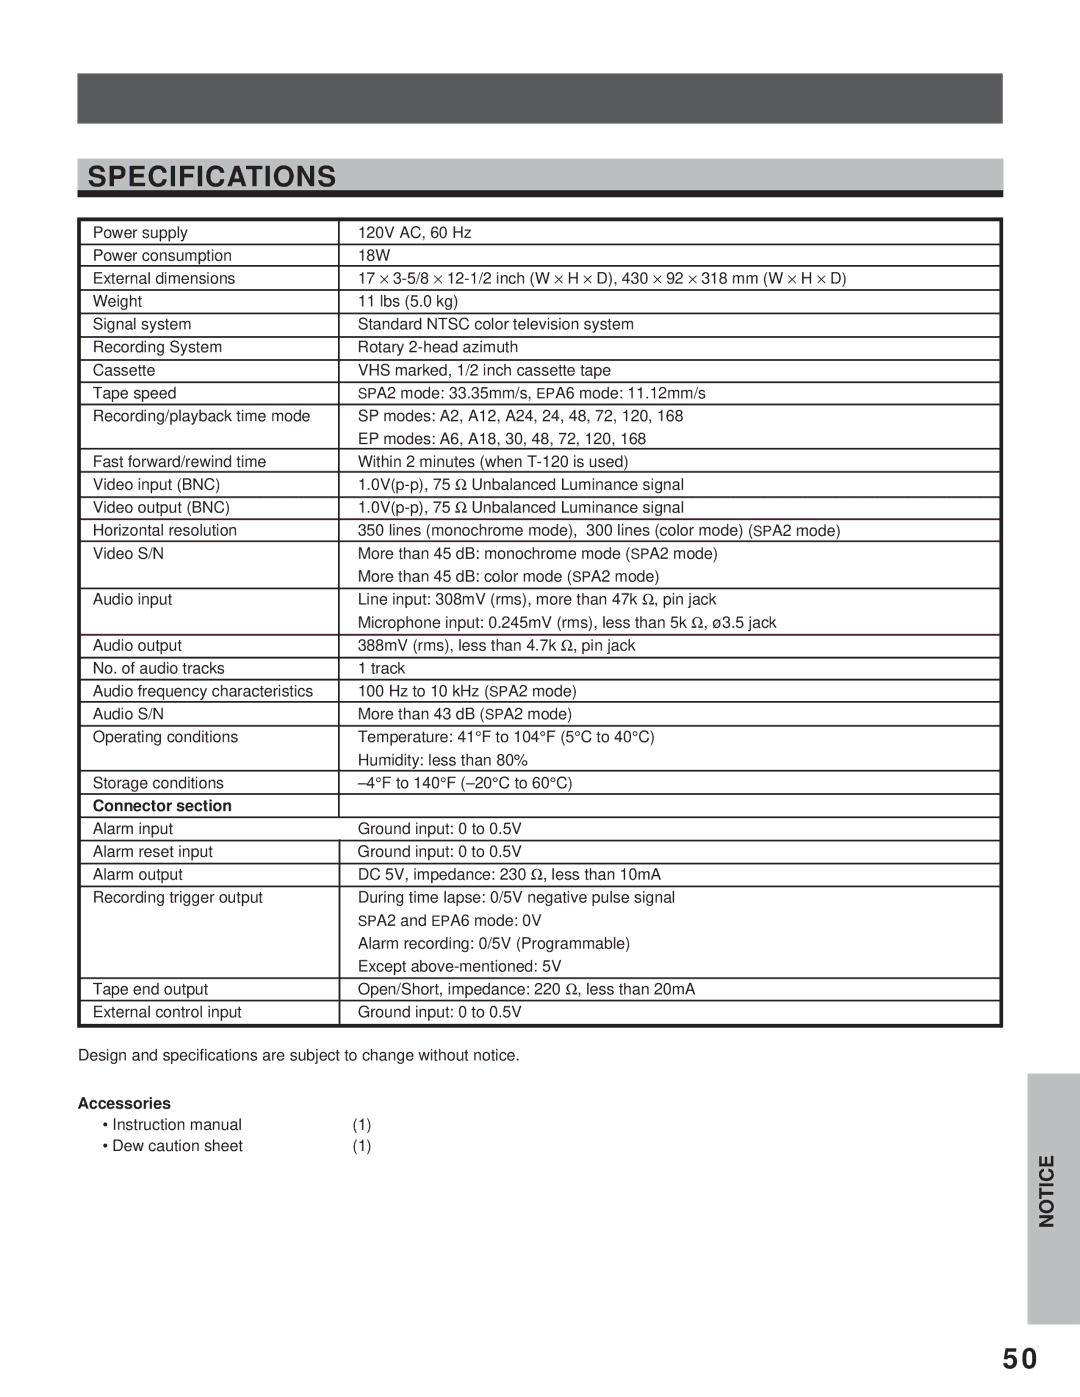 Toshiba kV-9168A instruction manual Specifications, Connector section, Accessories, Dew caution sheet 